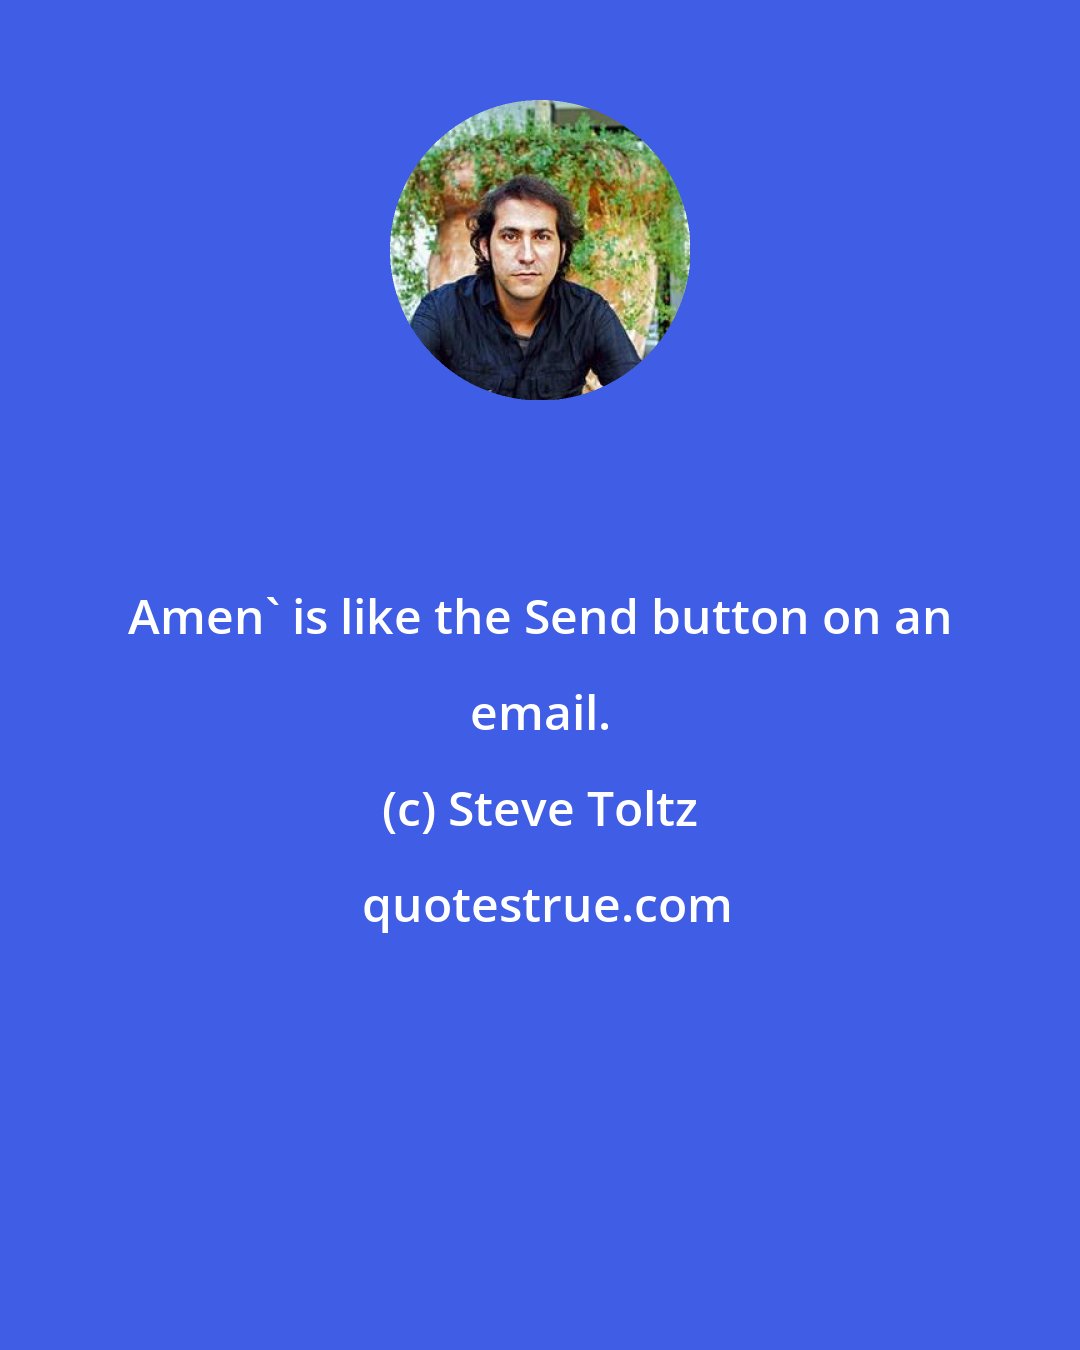 Steve Toltz: Amen' is like the Send button on an email.